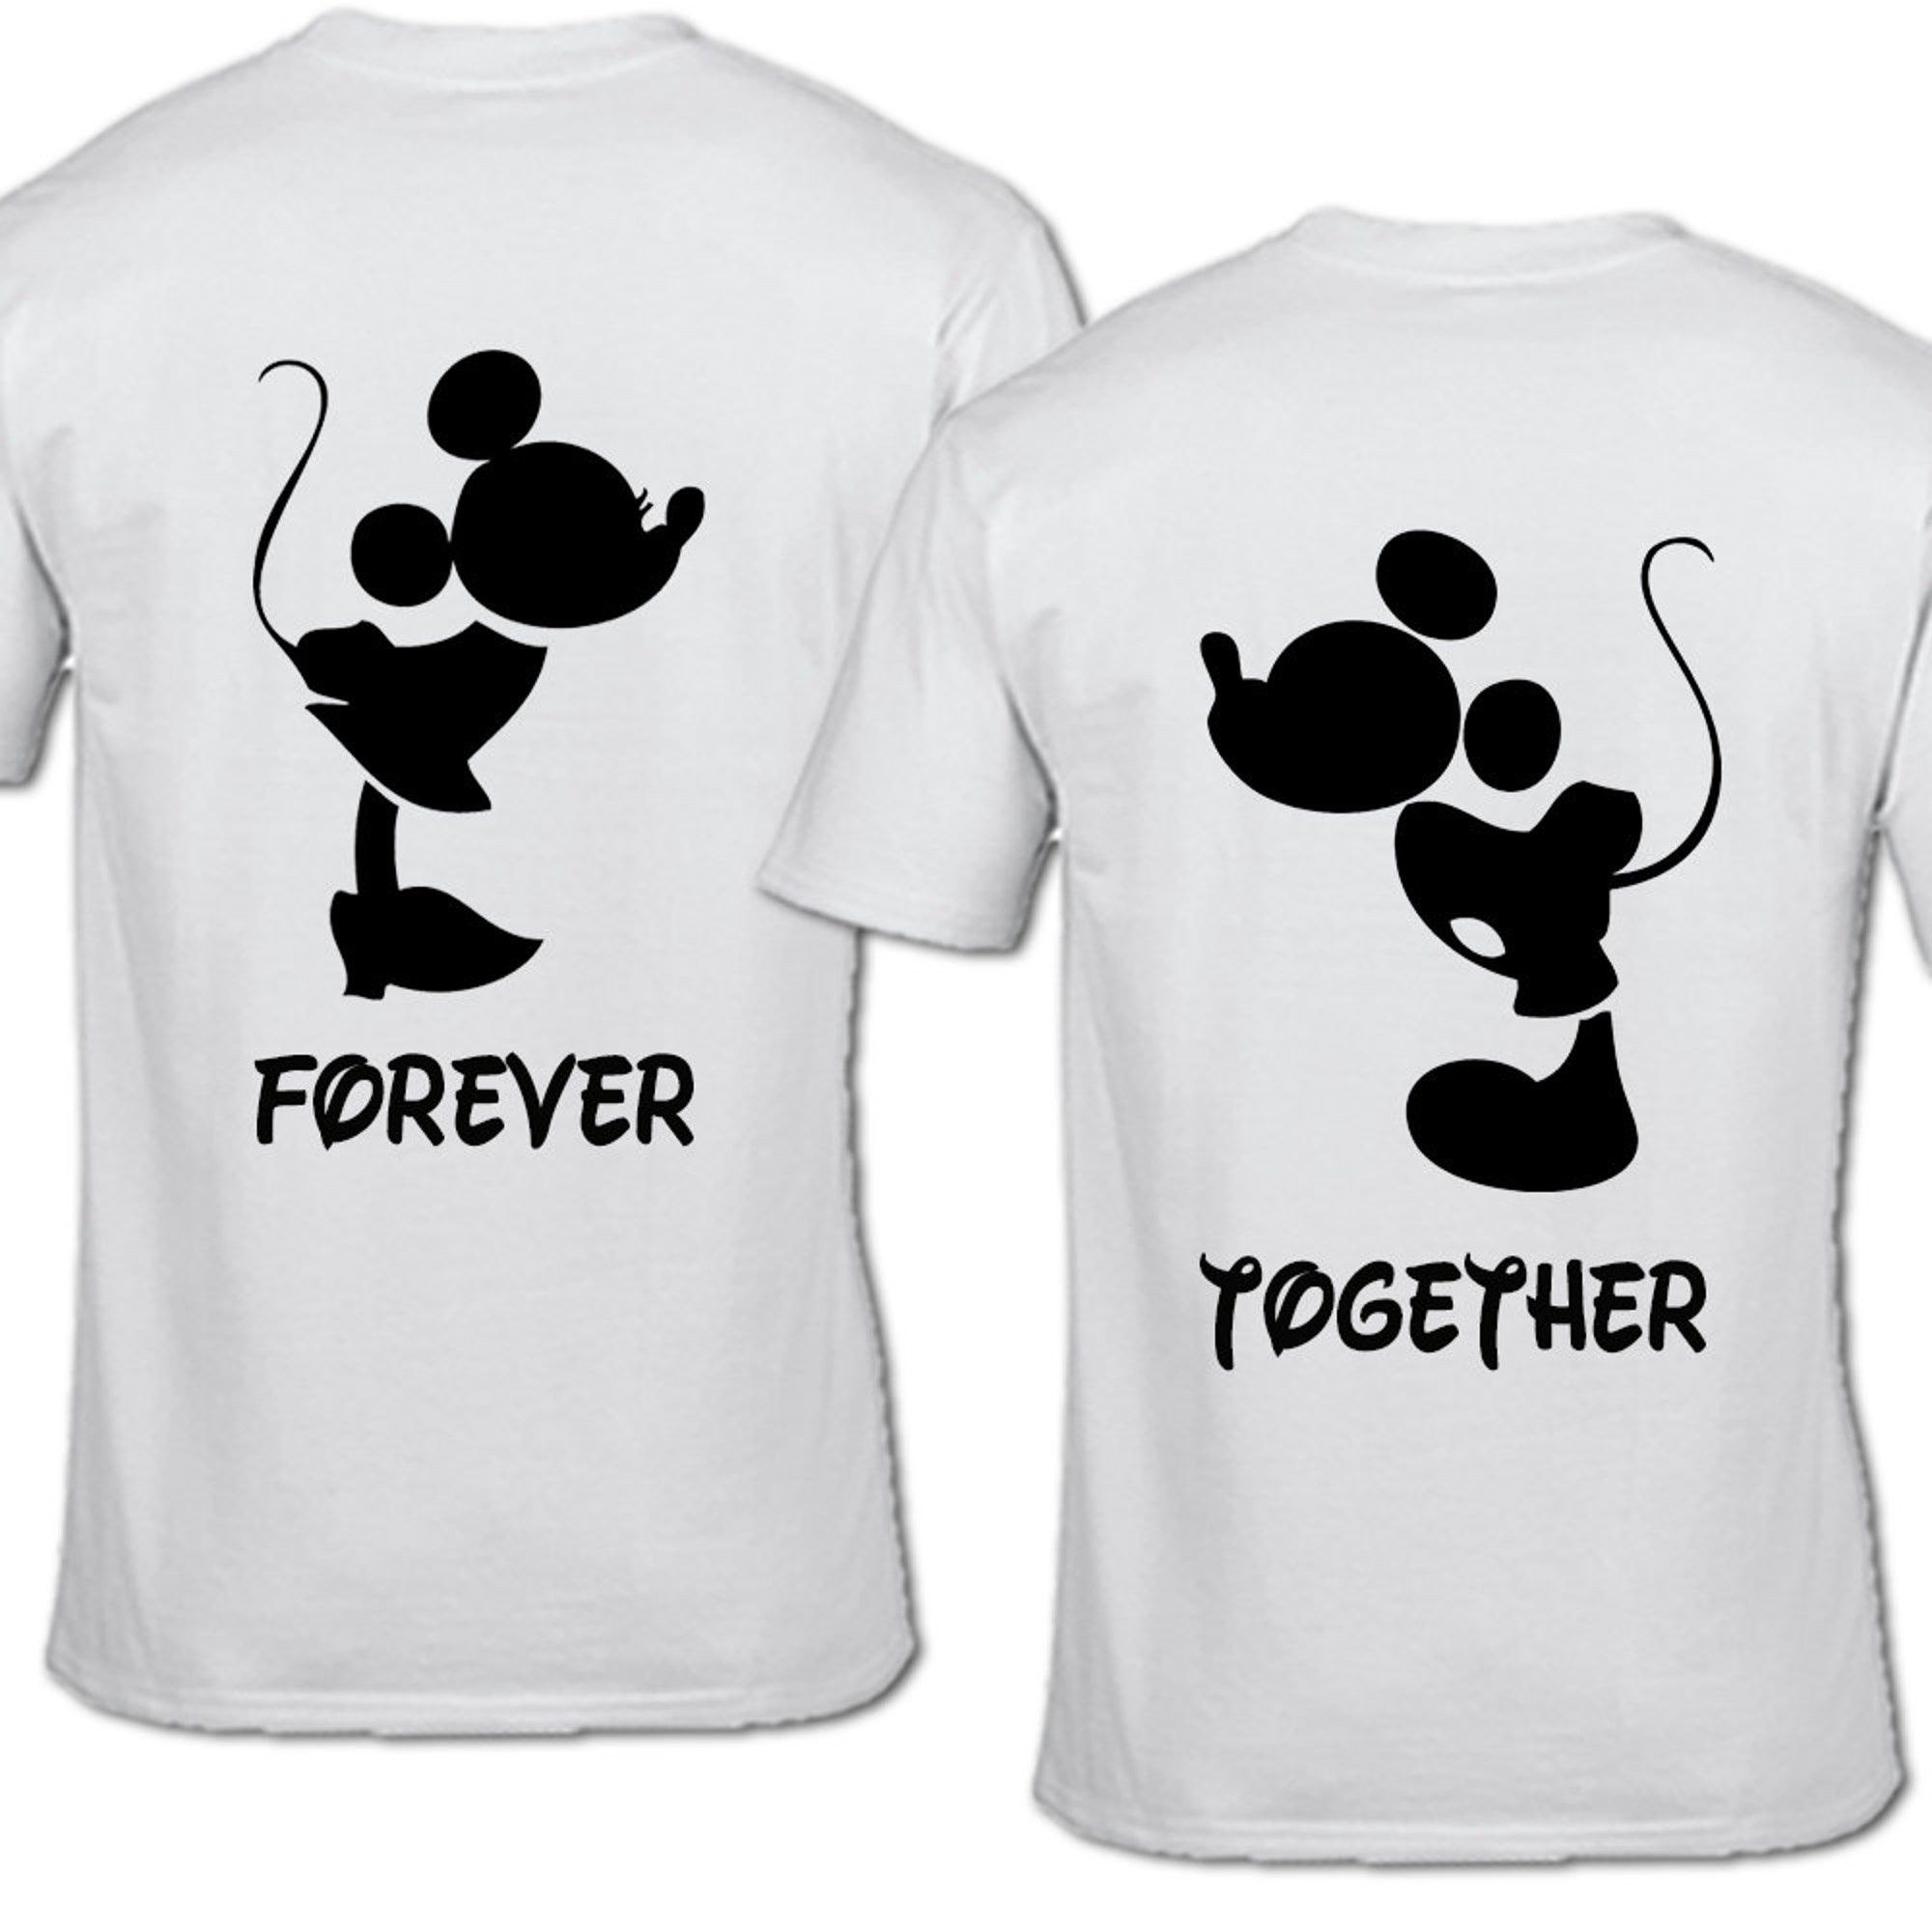 FOREVER TOGETHER t-shirts